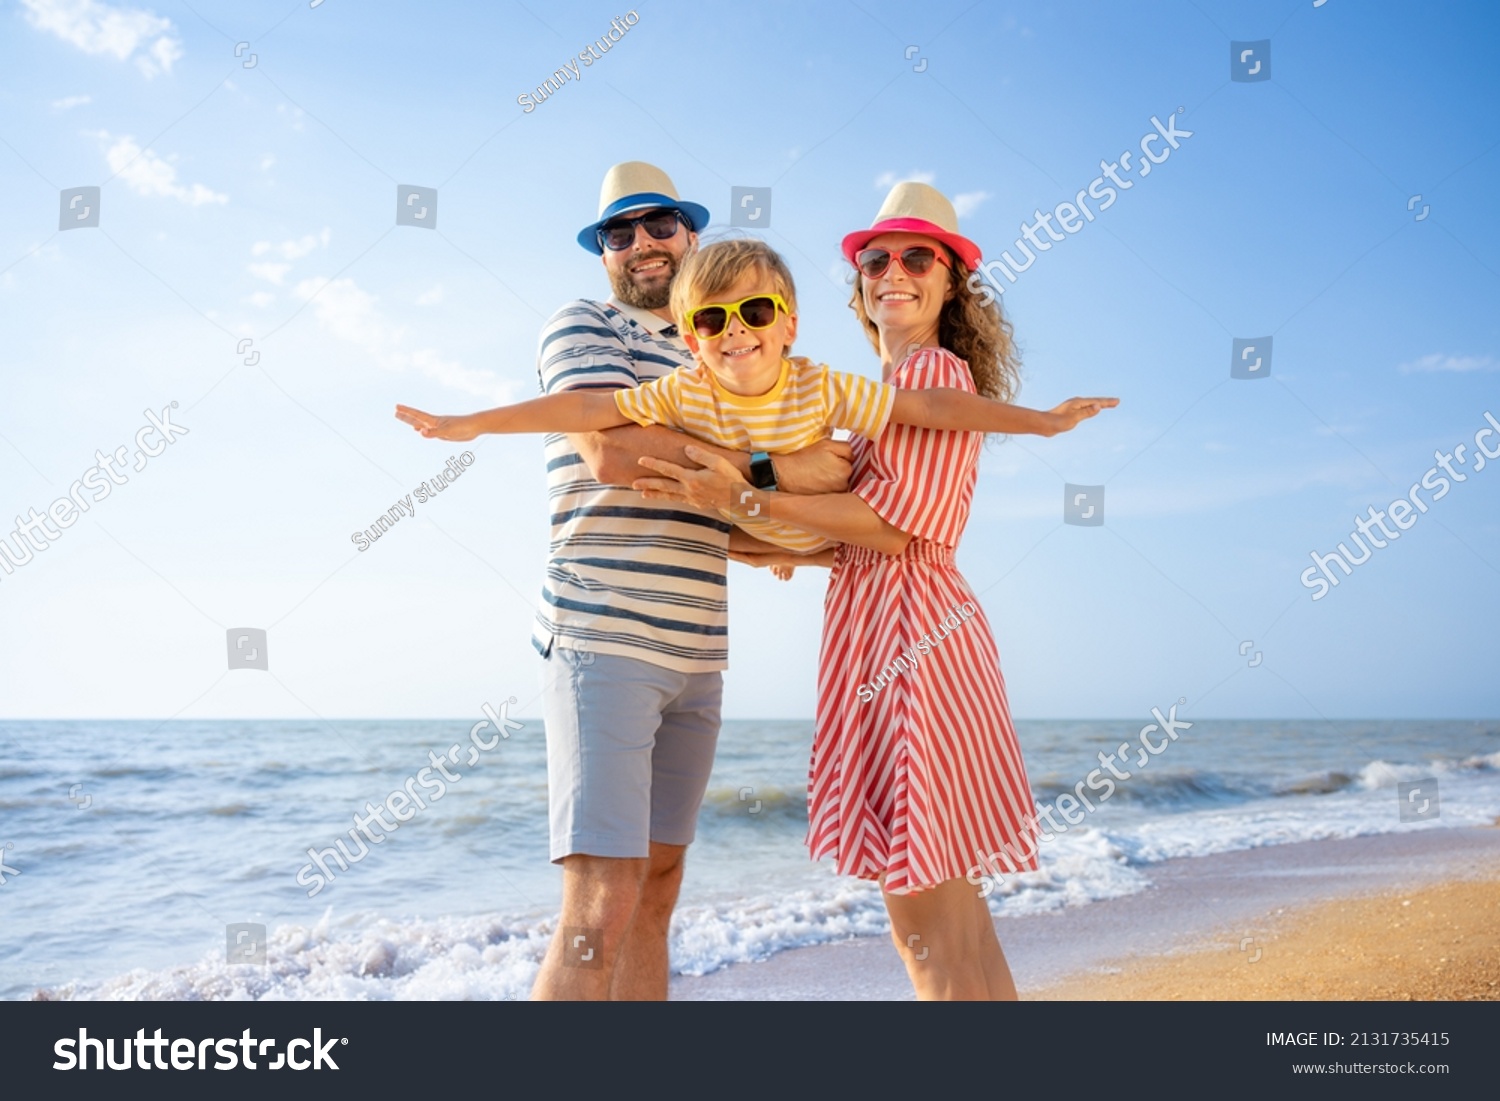 Happy family having fun on the beach. Mother and father holding son against blue sea and sky background. Summer vacation concept #2131735415